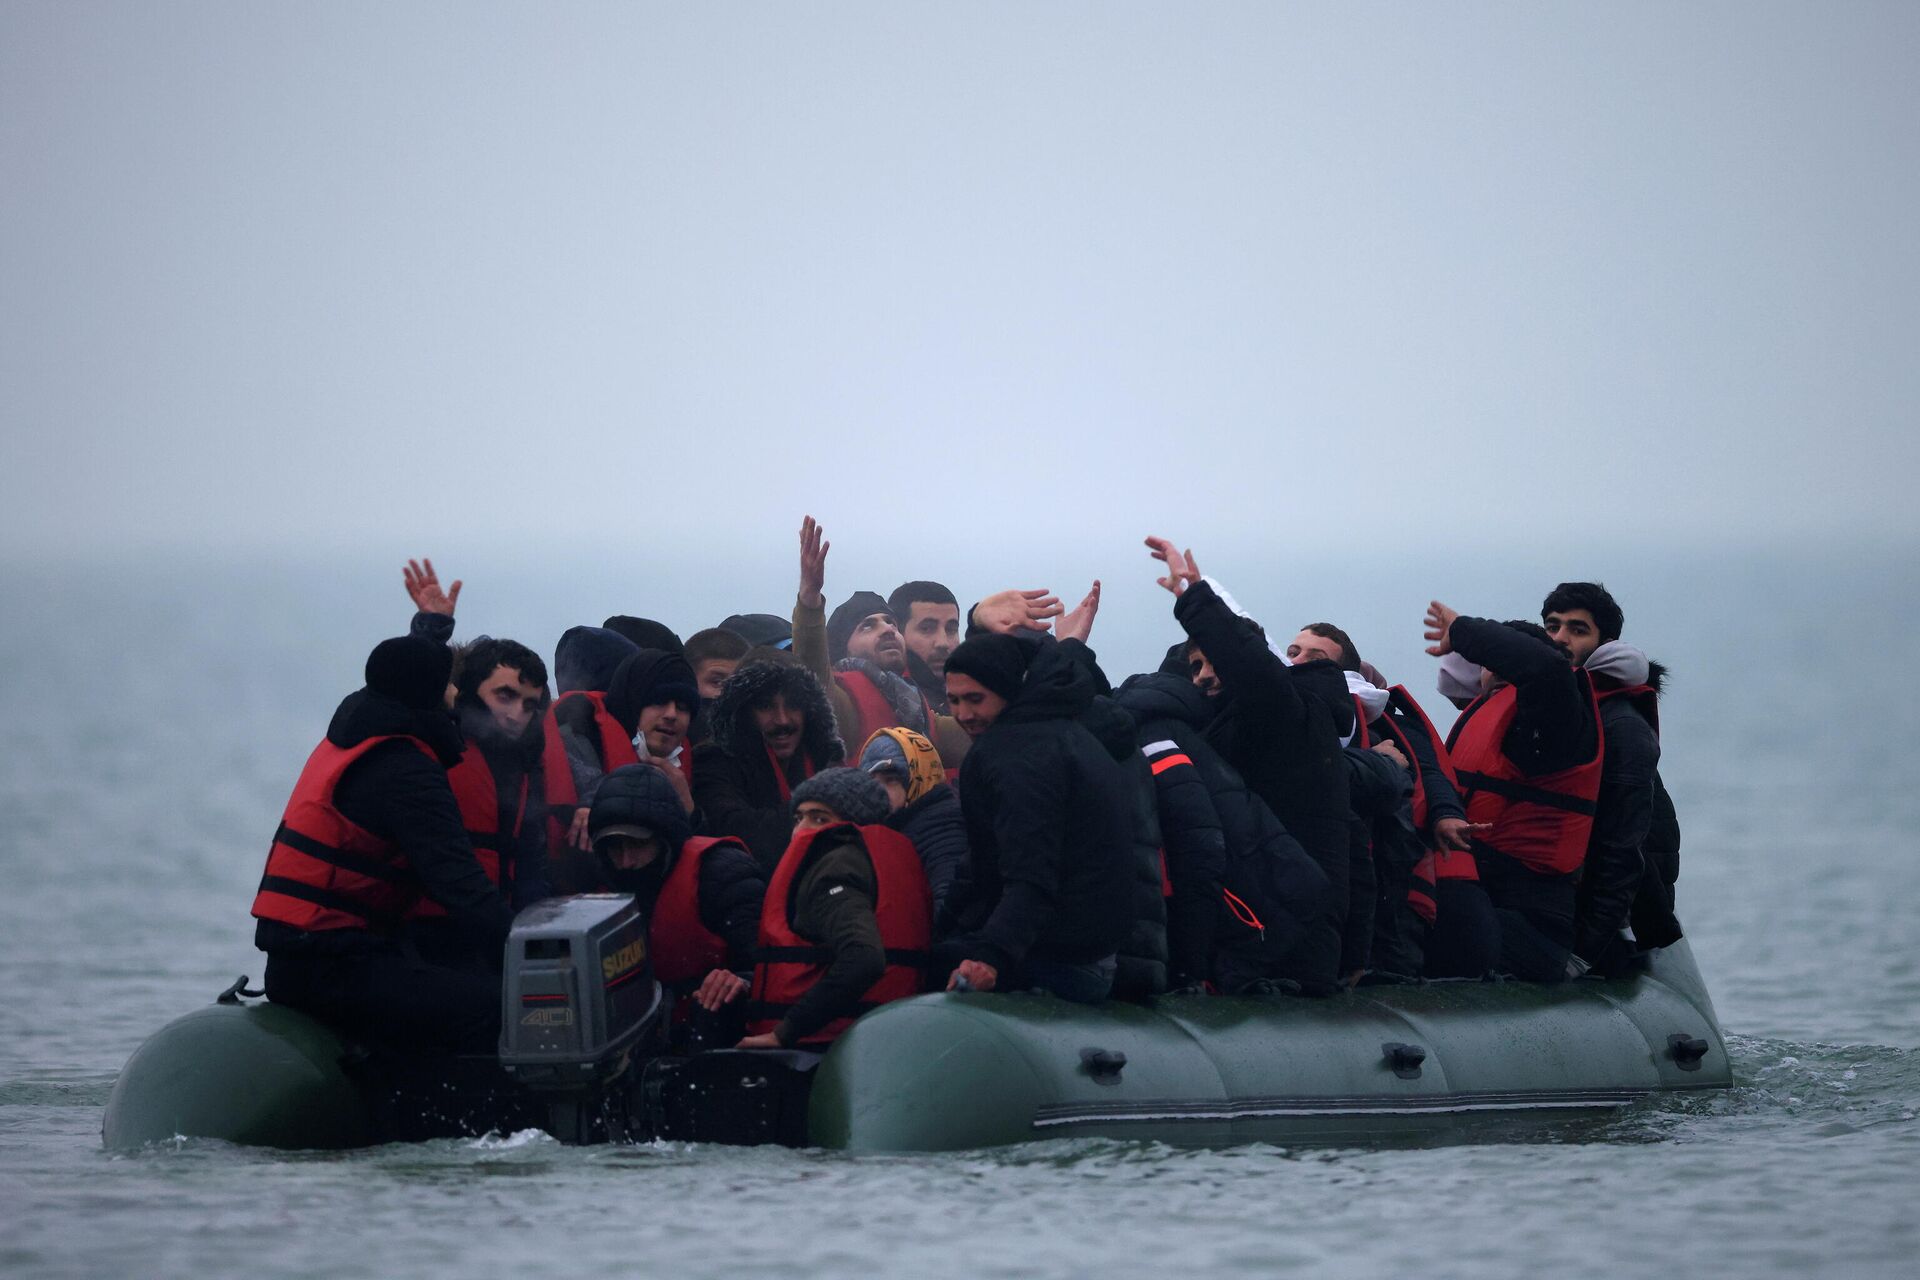 A group of more than 40 migrants react as they succeeded to get on an inflatable dinghy, to leave the coast of northern France and to cross the English Channel, near Wimereux, France, November 24, 2021. - Sputnik International, 1920, 25.11.2021